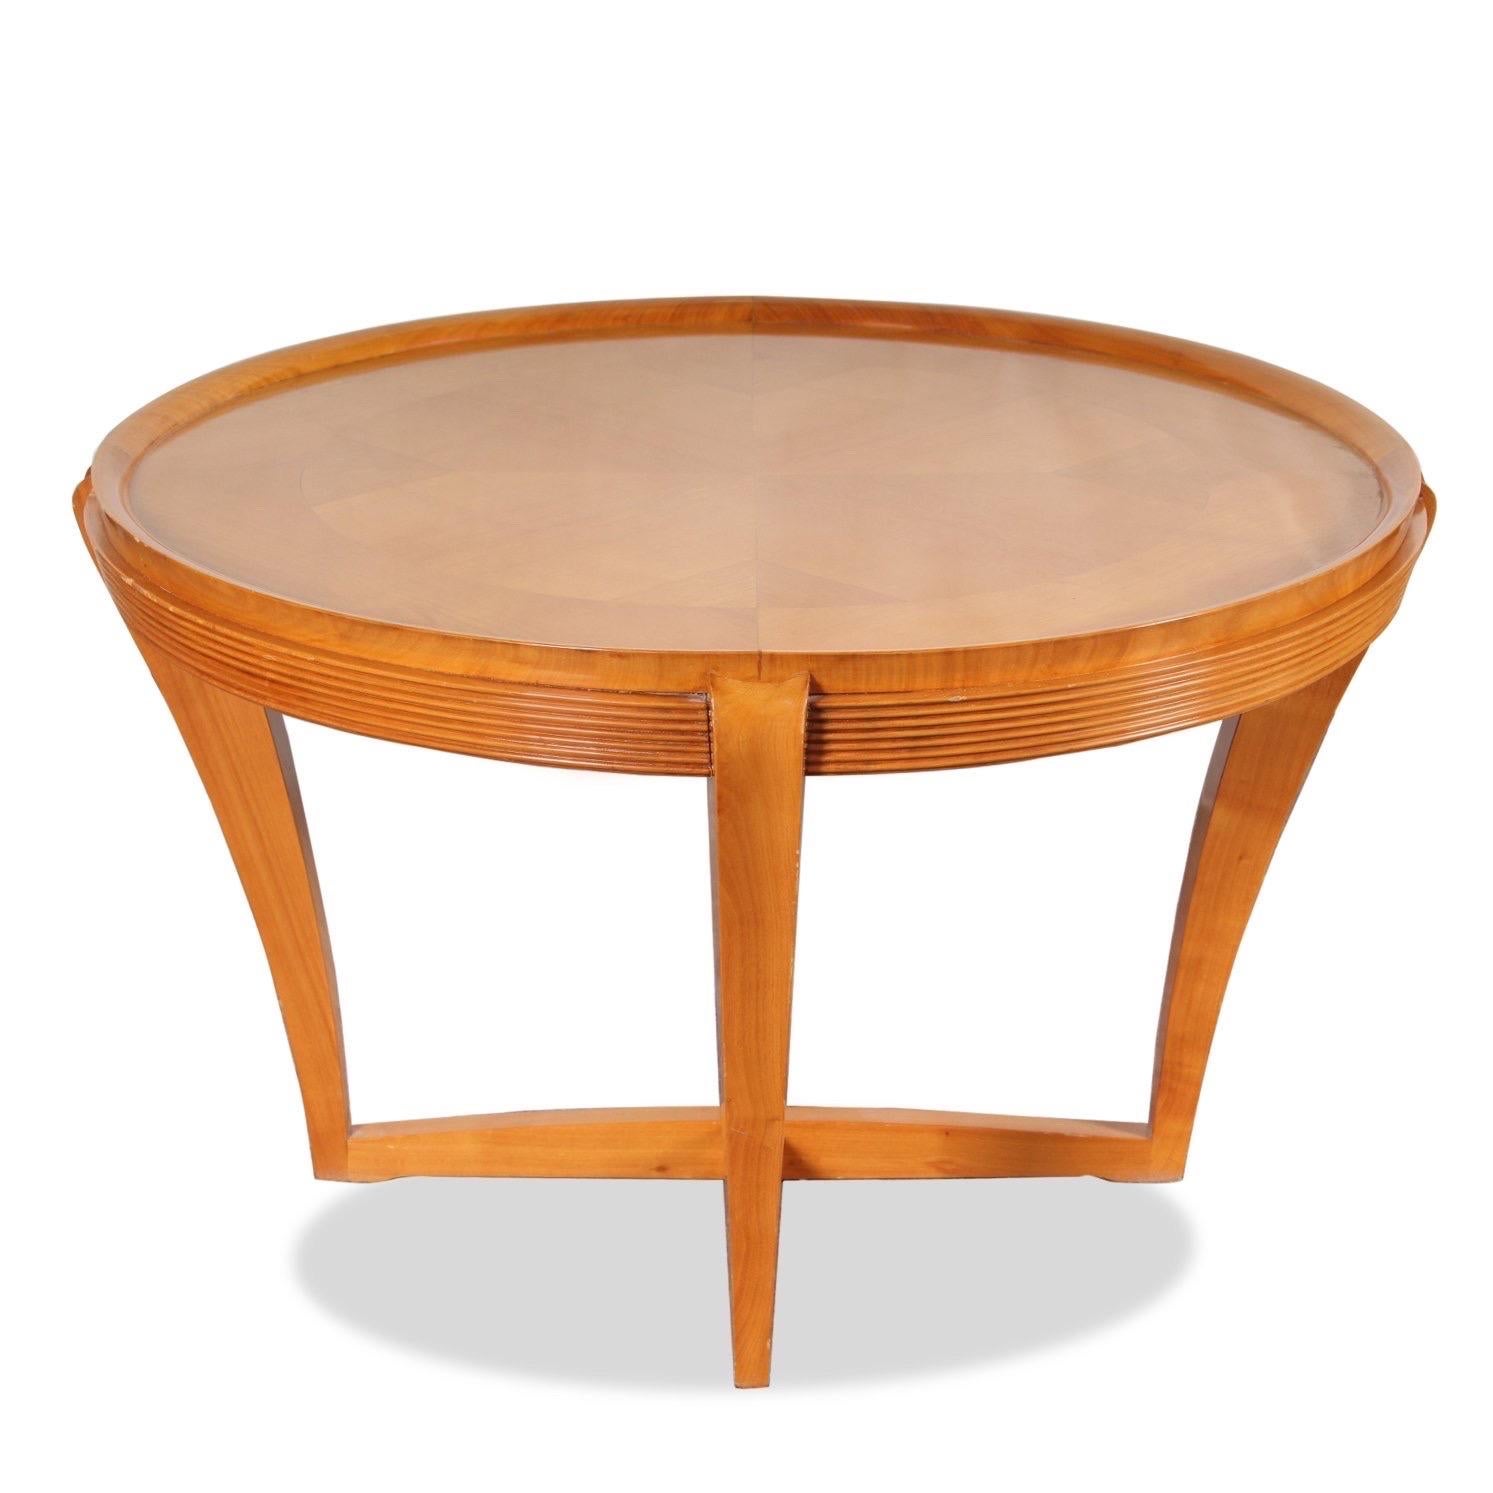 A satinwood occasional table with sunburst pattern on round recessed top, supported by an intersecting base.

Dimensions: 31” W x 19.5”H.